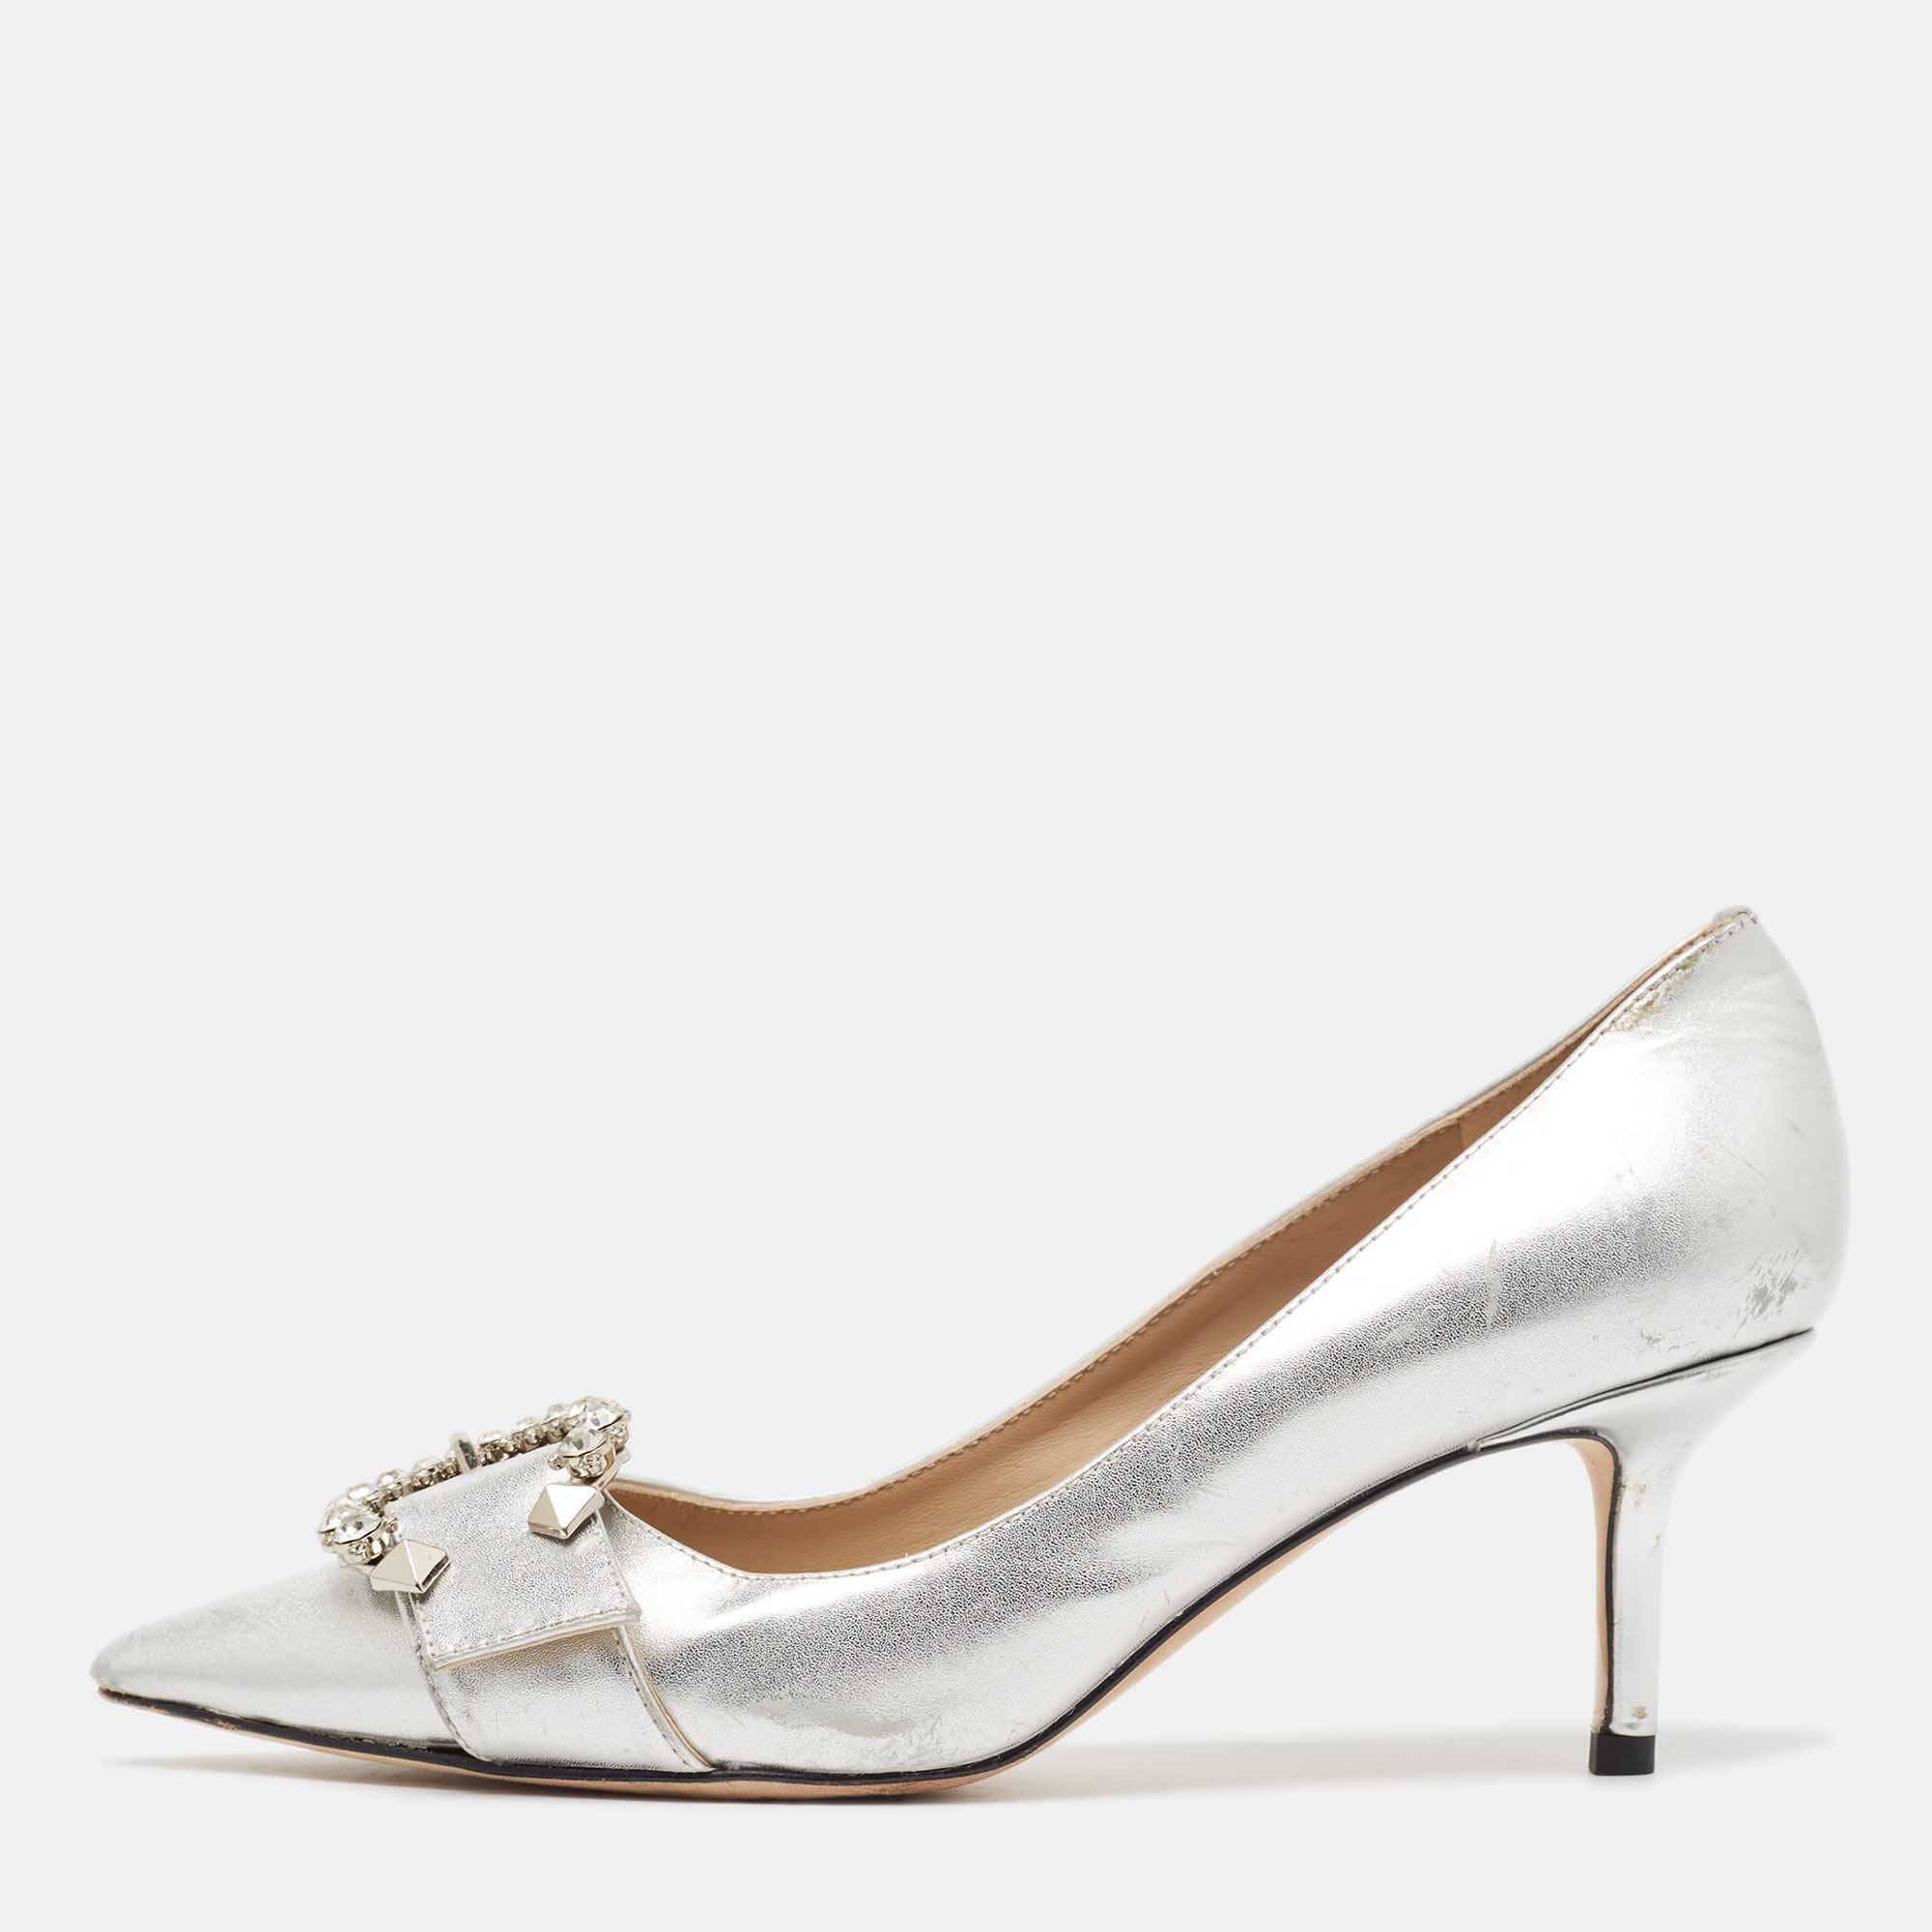 Jimmy choo silver leather crystal embellished pointed toe pumps size 37